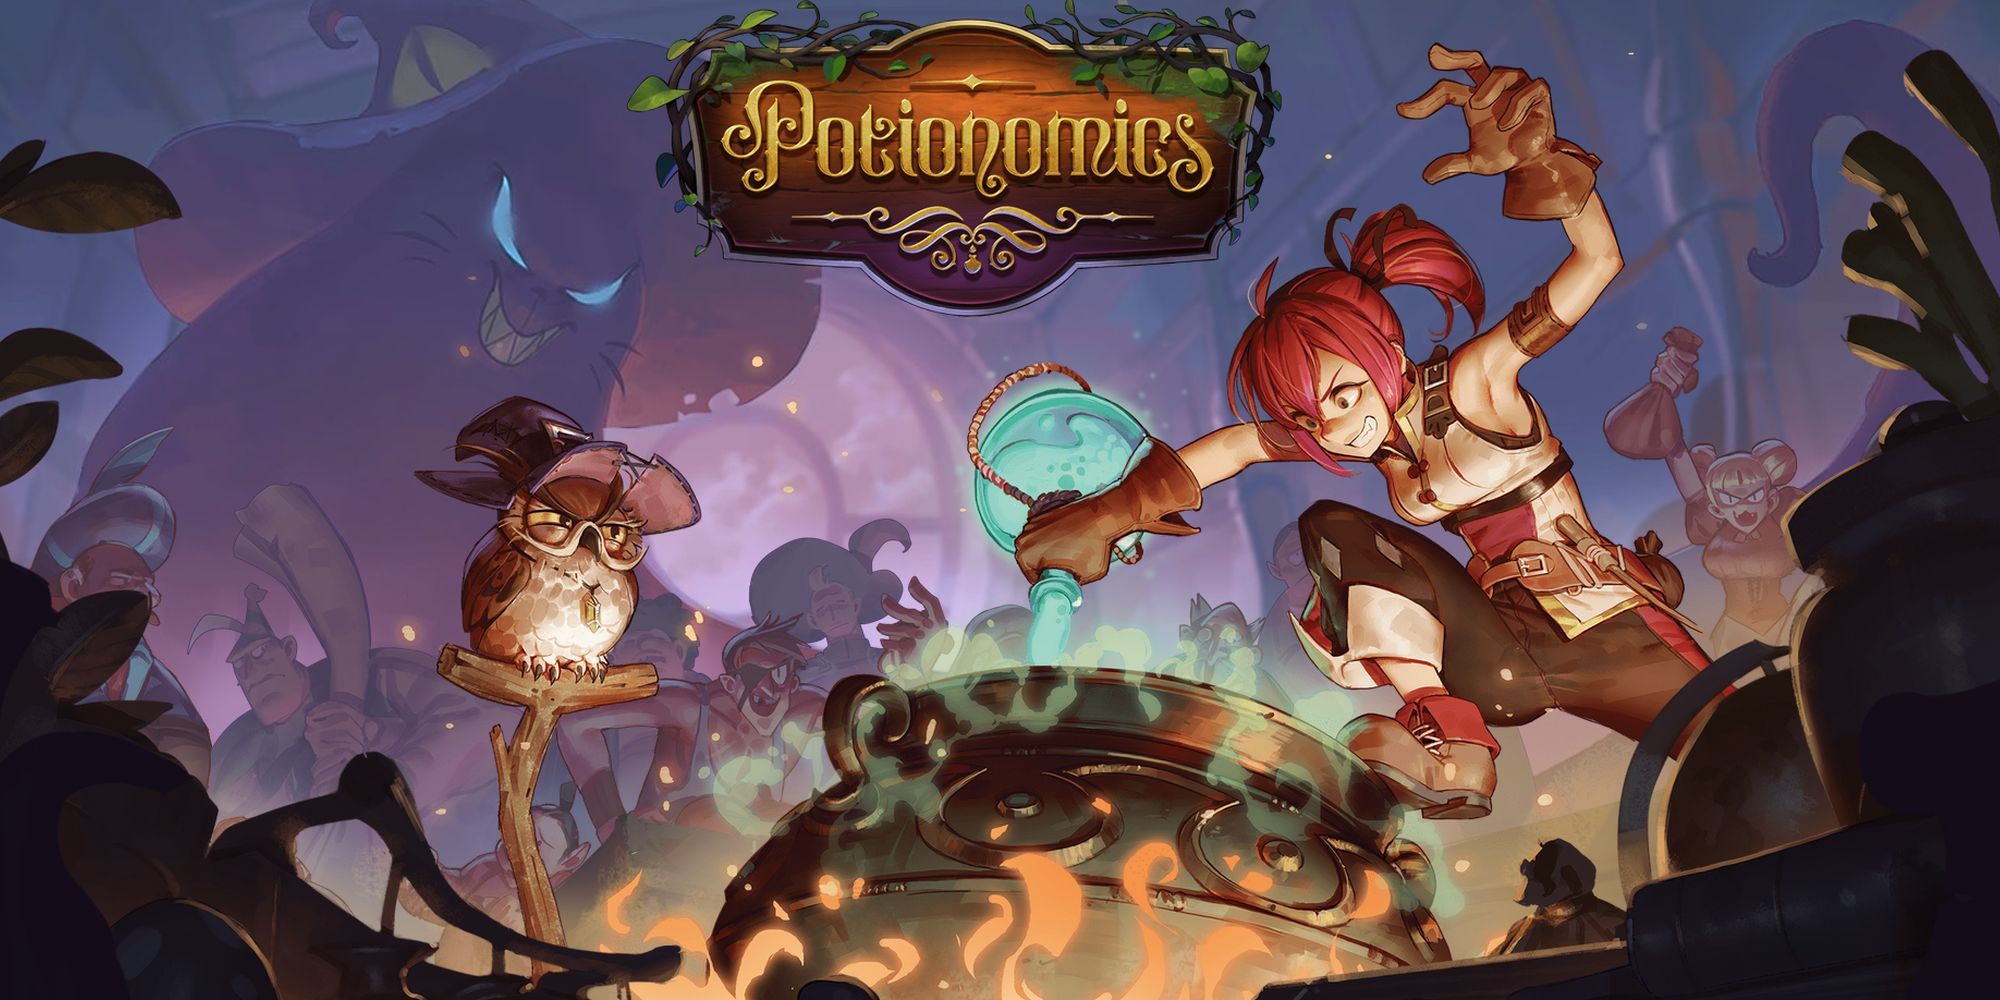 A header image showing the art and logo of Potionomics